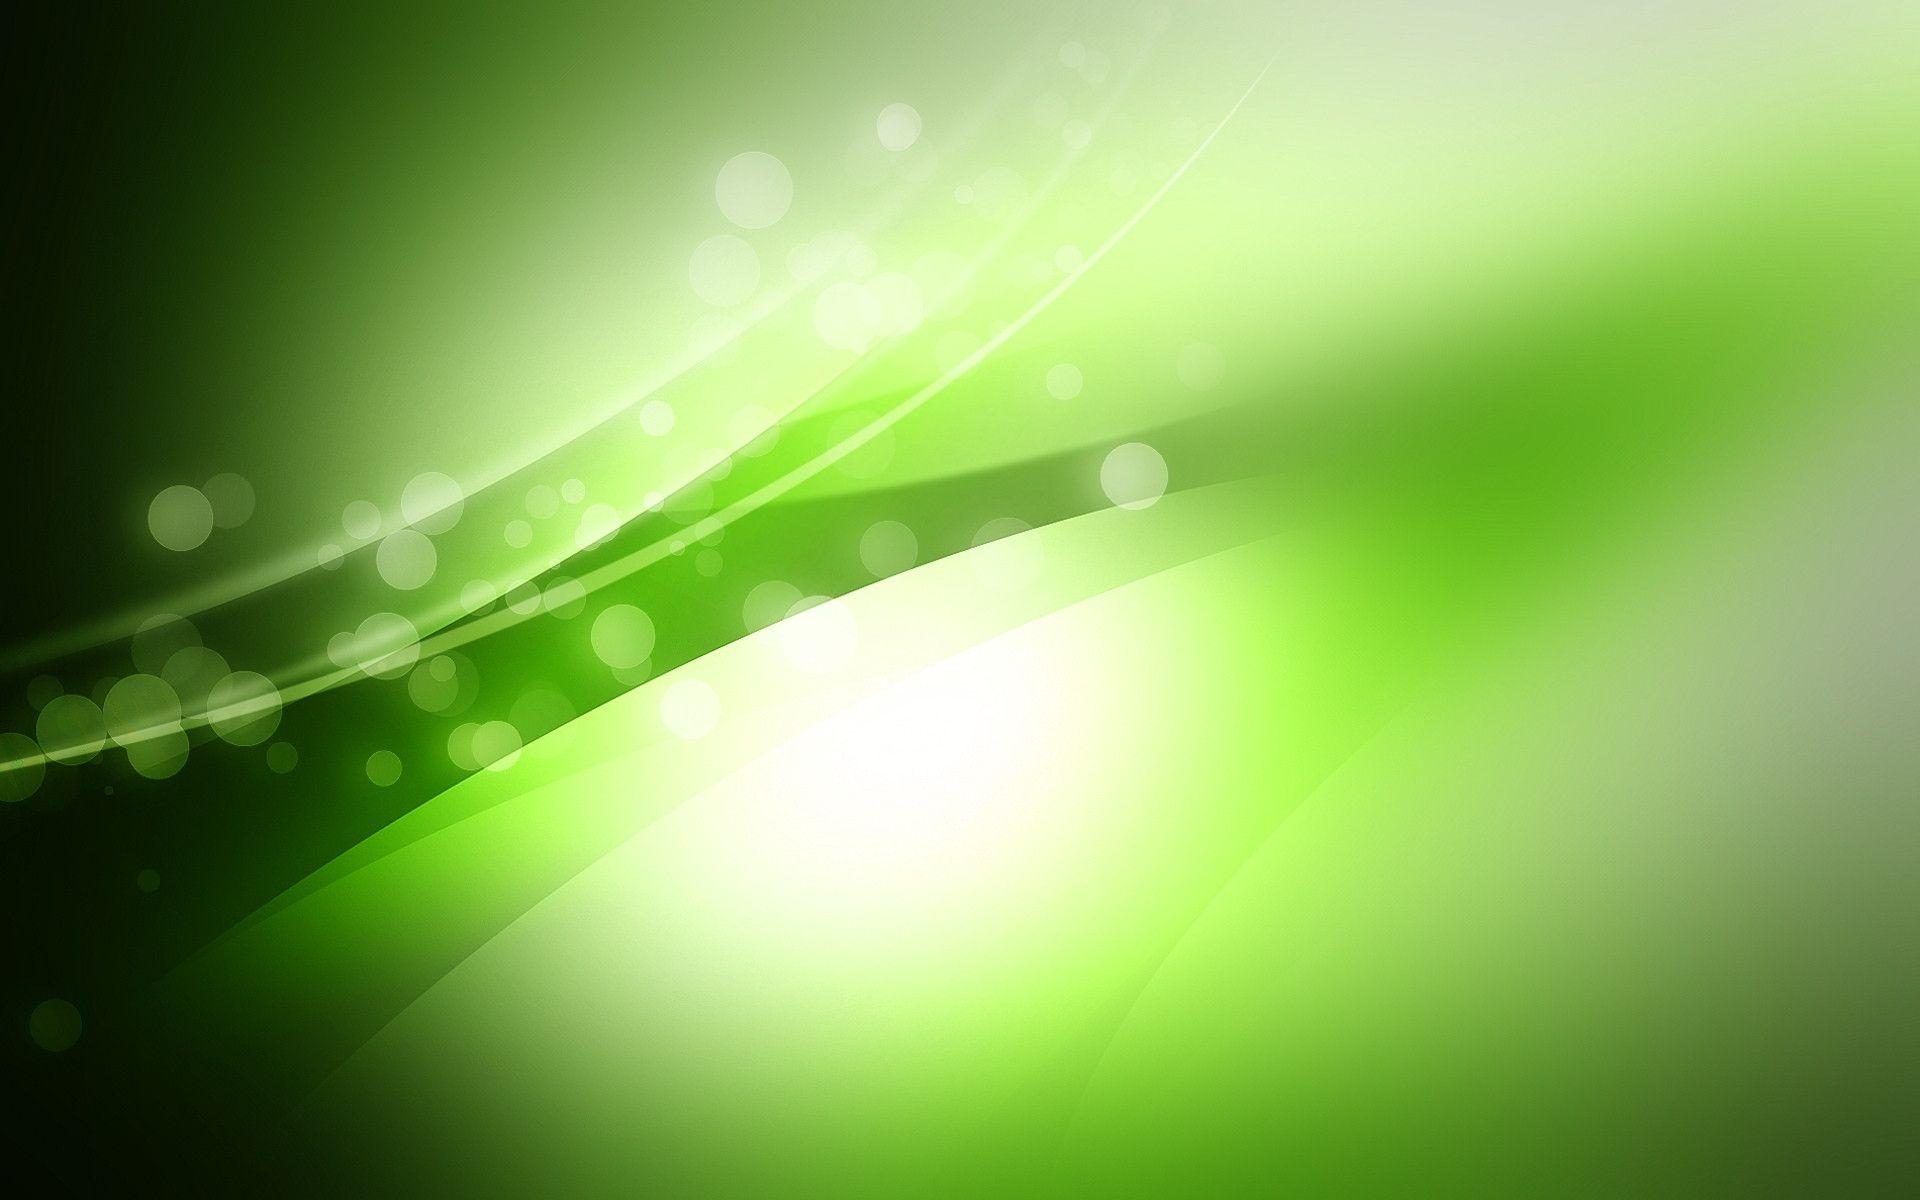 Green Abstract wallpaper ·① Download free stunning HD 